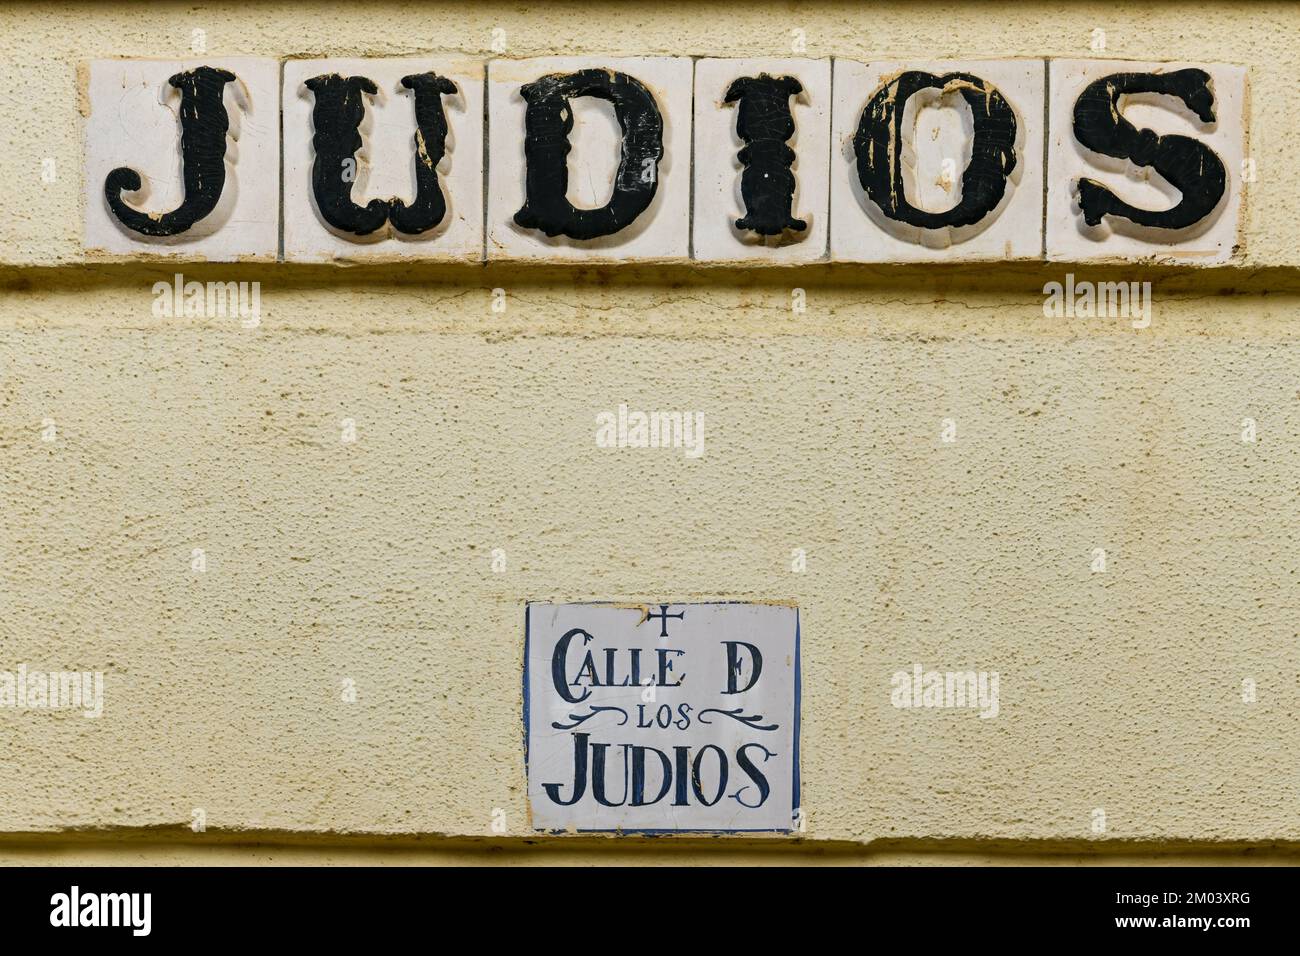 A street sign to the entrance of the Jewish quarter in Cordoba, Spain inscribed with 'Street of the Jews.' Stock Photo